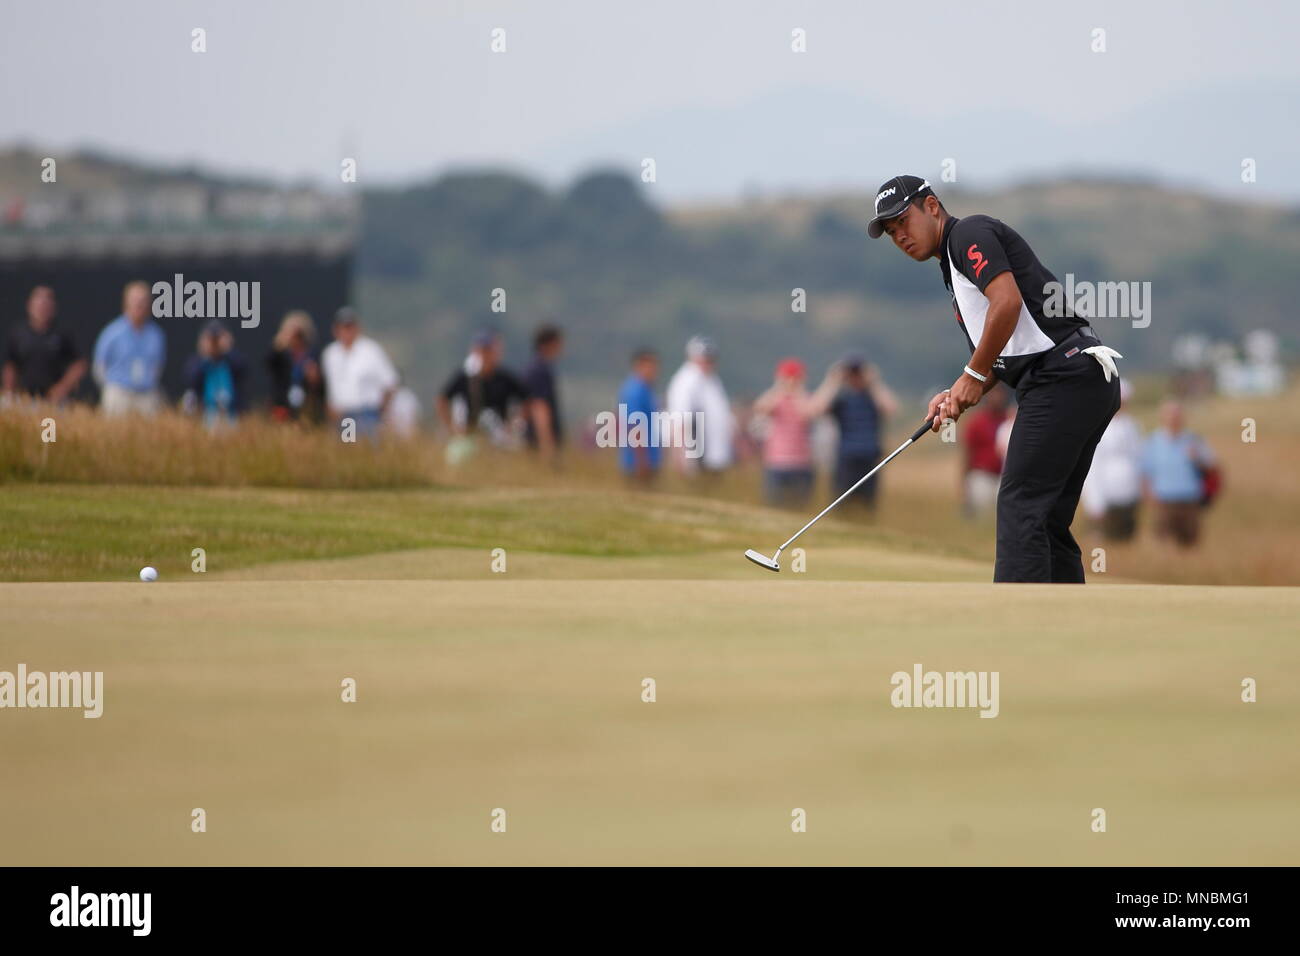 MUIRFIELD, SCOTLAND - JULY 18: Hideki Matsuyama birdie putt at the 5th green during the first round of The Open Championship 2013 at Muirfield Golf Club on July 18, 2013 in Scotland. Stock Photo